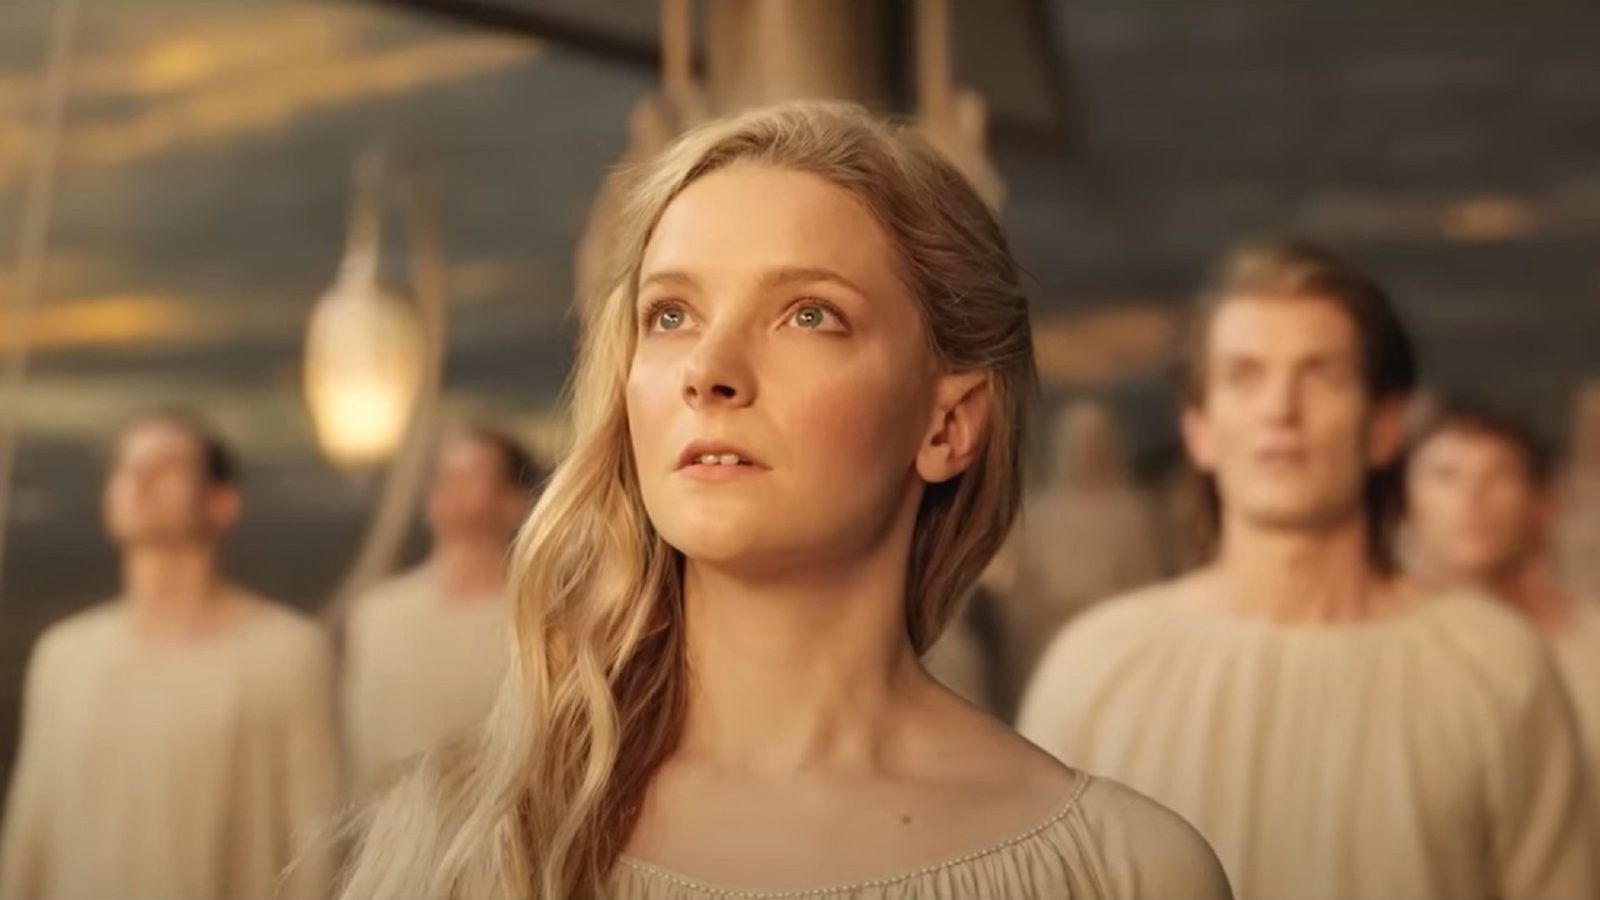 Galadriel picks up the sword in ‘The Lord of the Rings: The Rings of Power’ final trailer